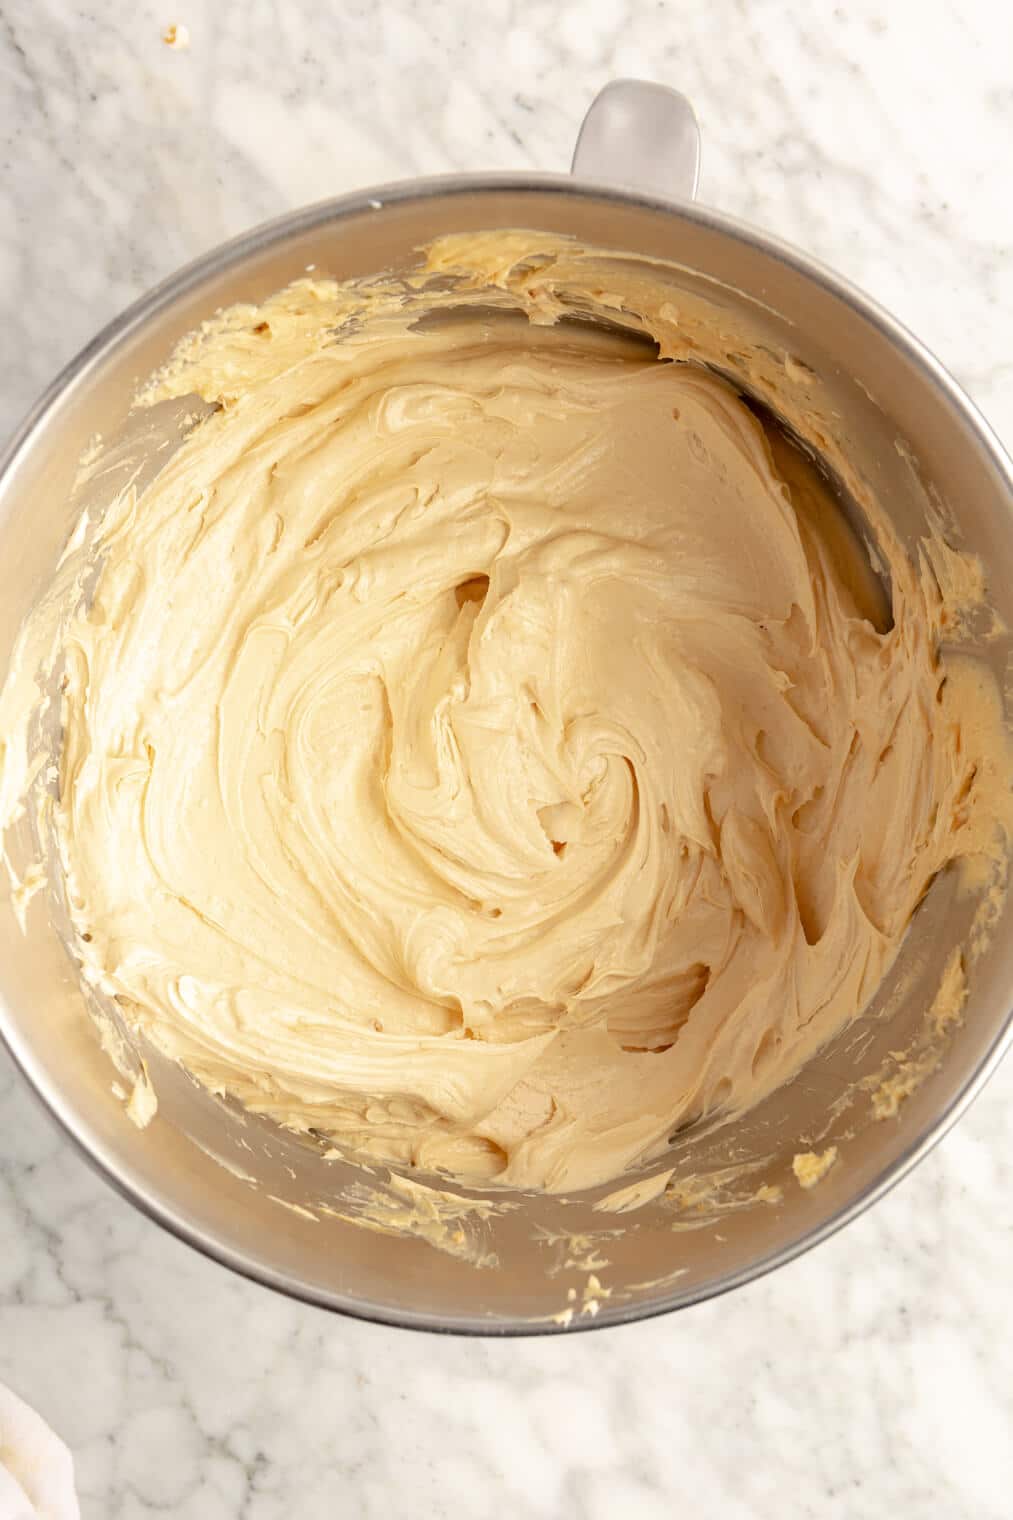 Smoothed peanut butter buttercream in a metal mixing bowl.